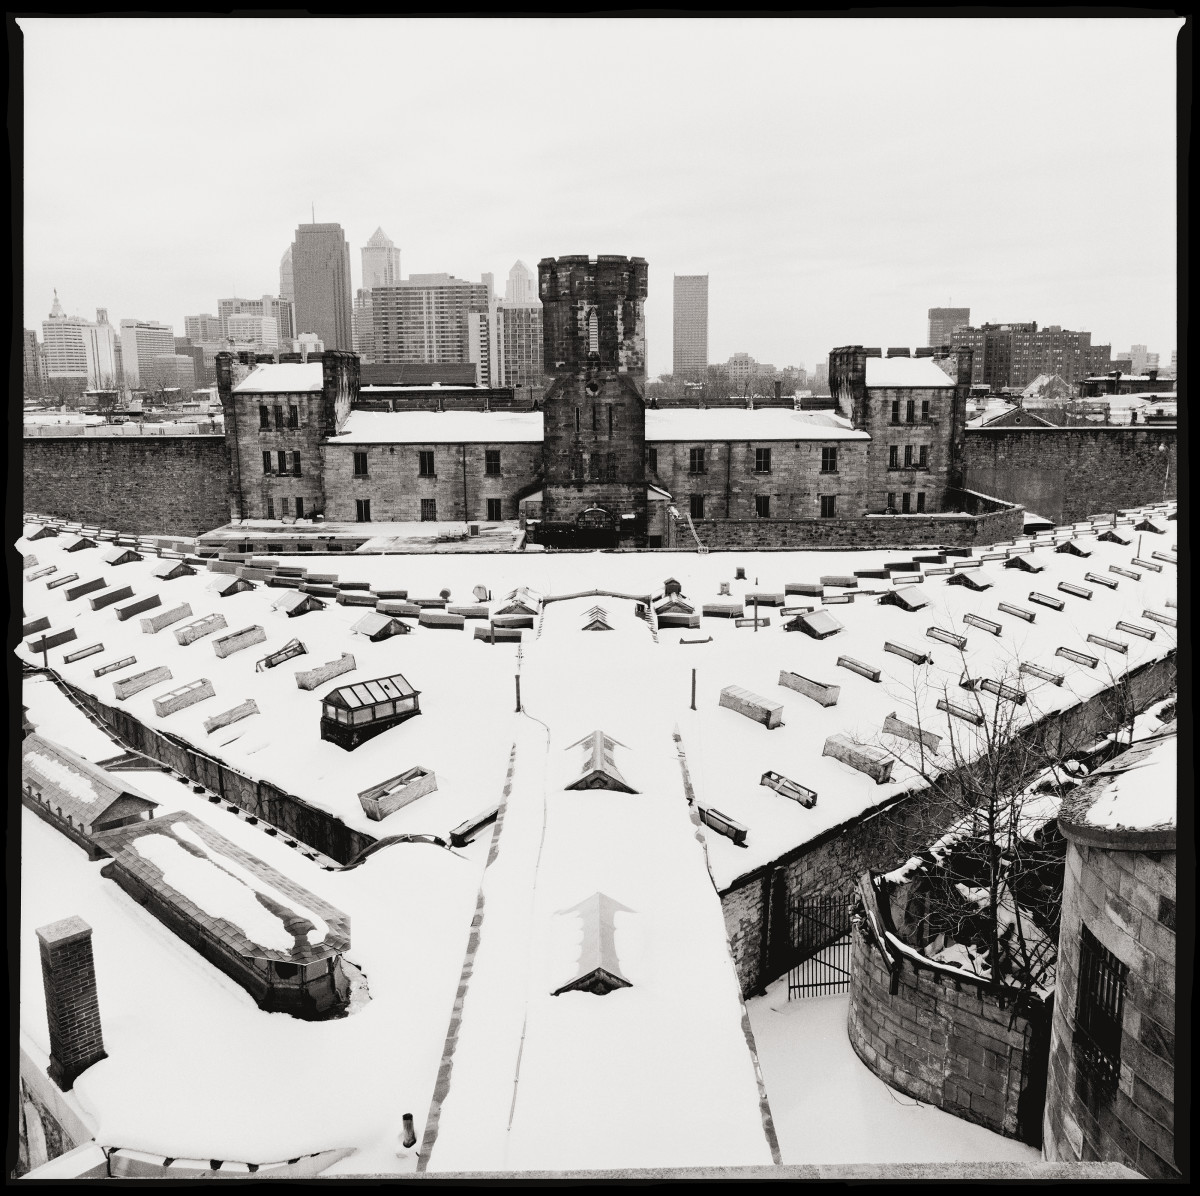 Looking Towards Downtown Philadelphia by Eric T. Kunsman  Image: ID: A black and white image shows a view of the compound with the Philadelphia skyline in the background.  The compound has a wing in the center, and two branching off to each side from the center.  There is also a wing in the back.  The image is snowy and grey.